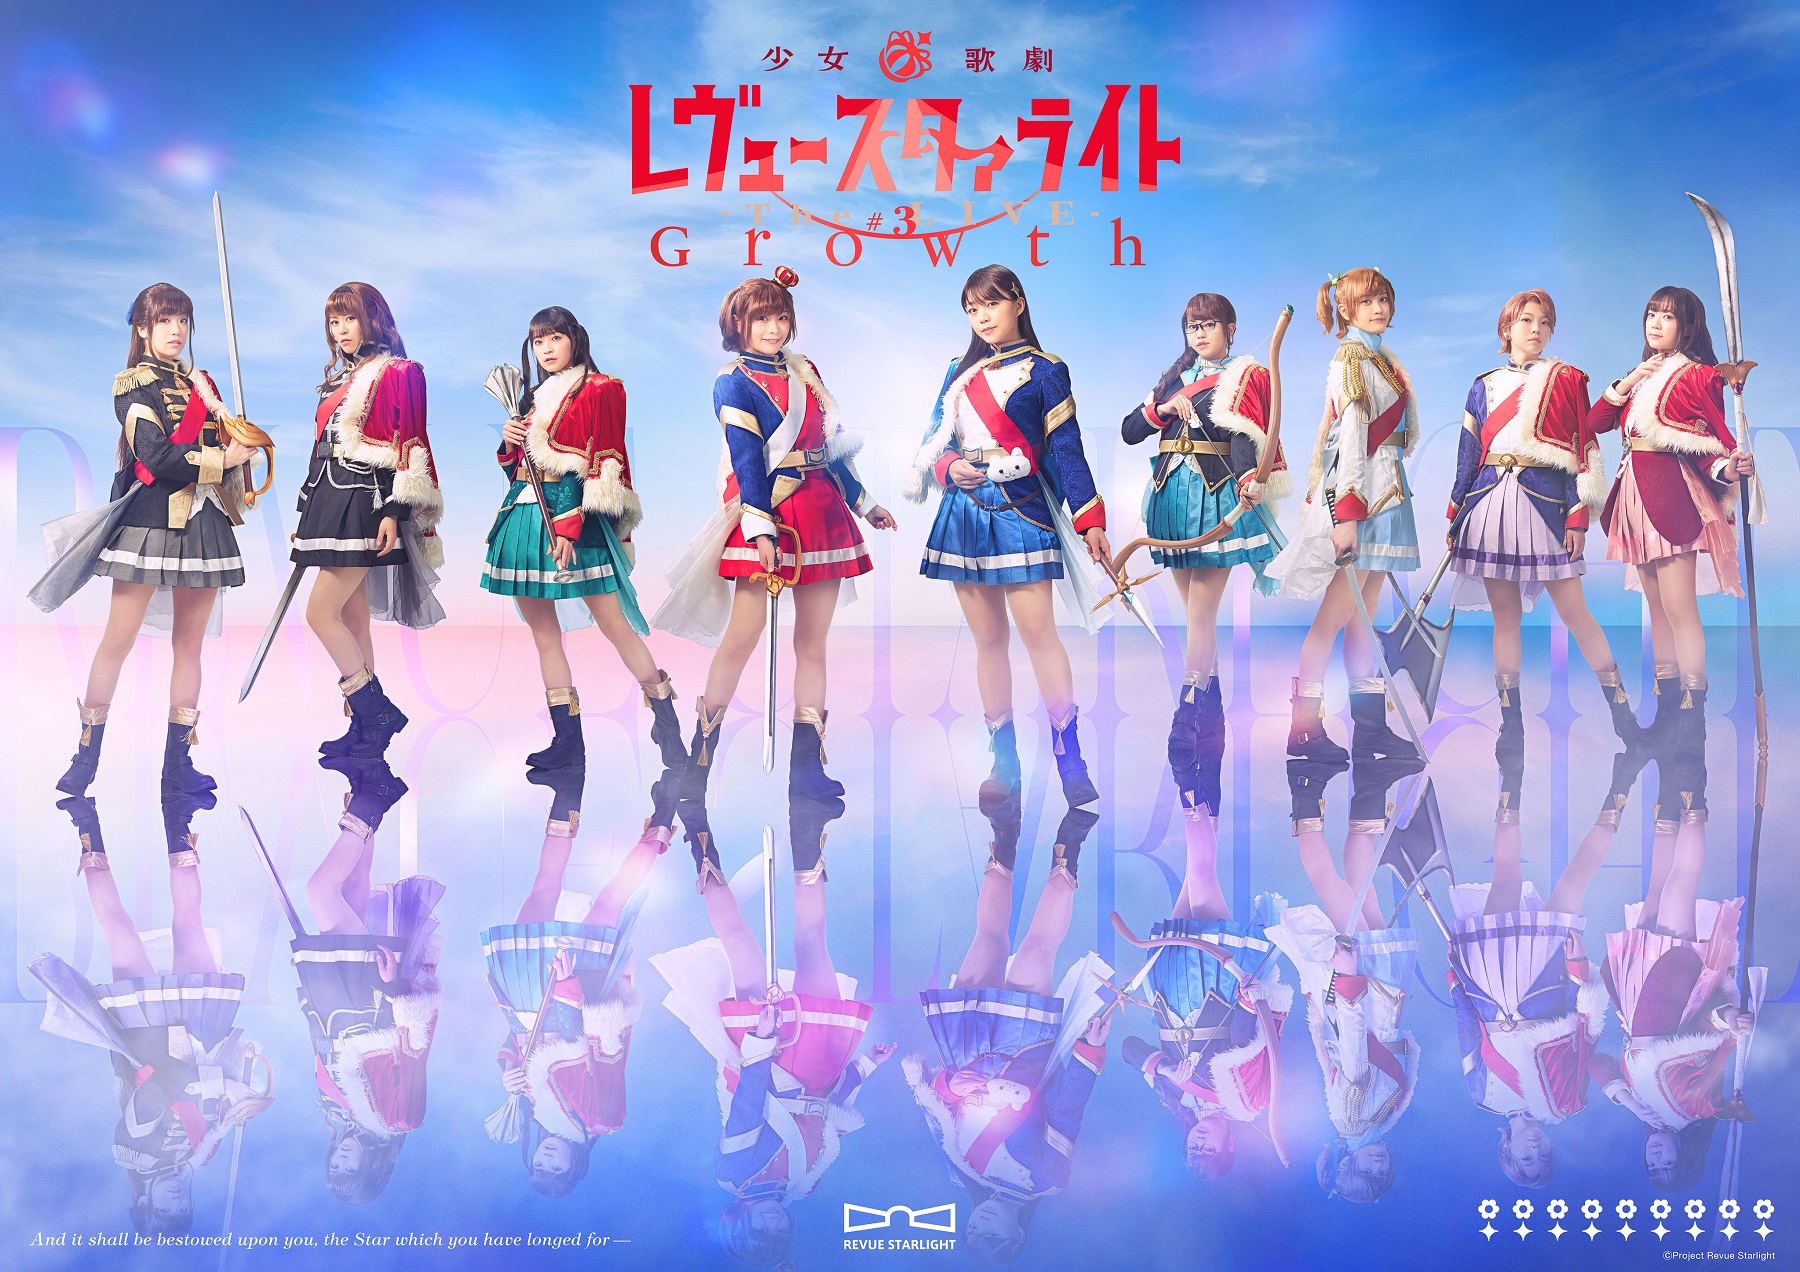 [Streaming+] Revue Starlight -The LIVE-#3 Growth